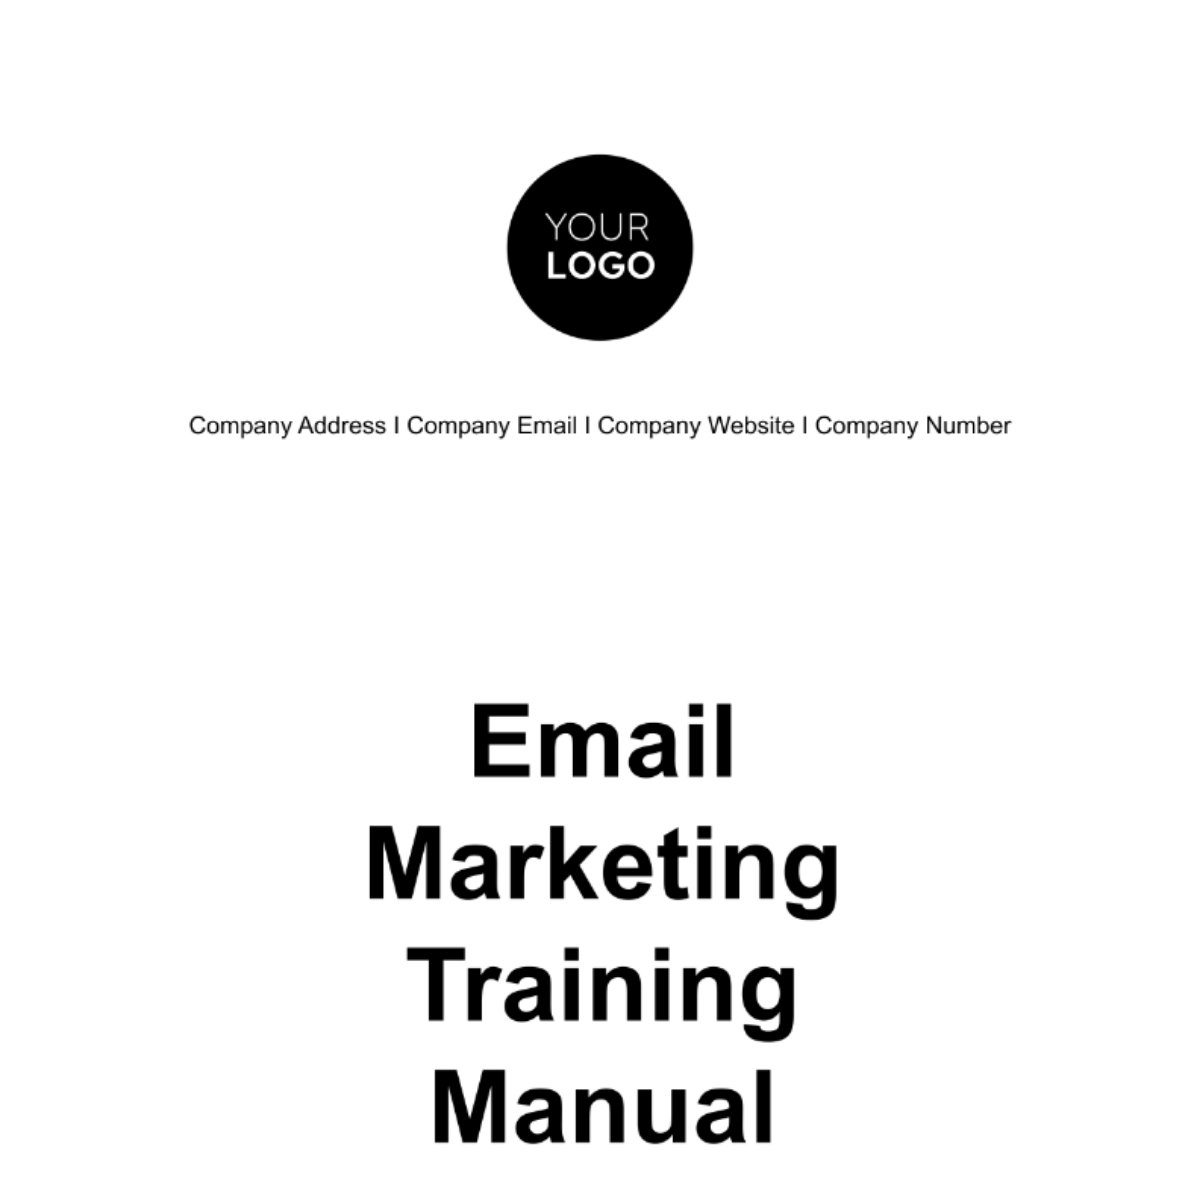 Free Email Marketing Training Manual Template